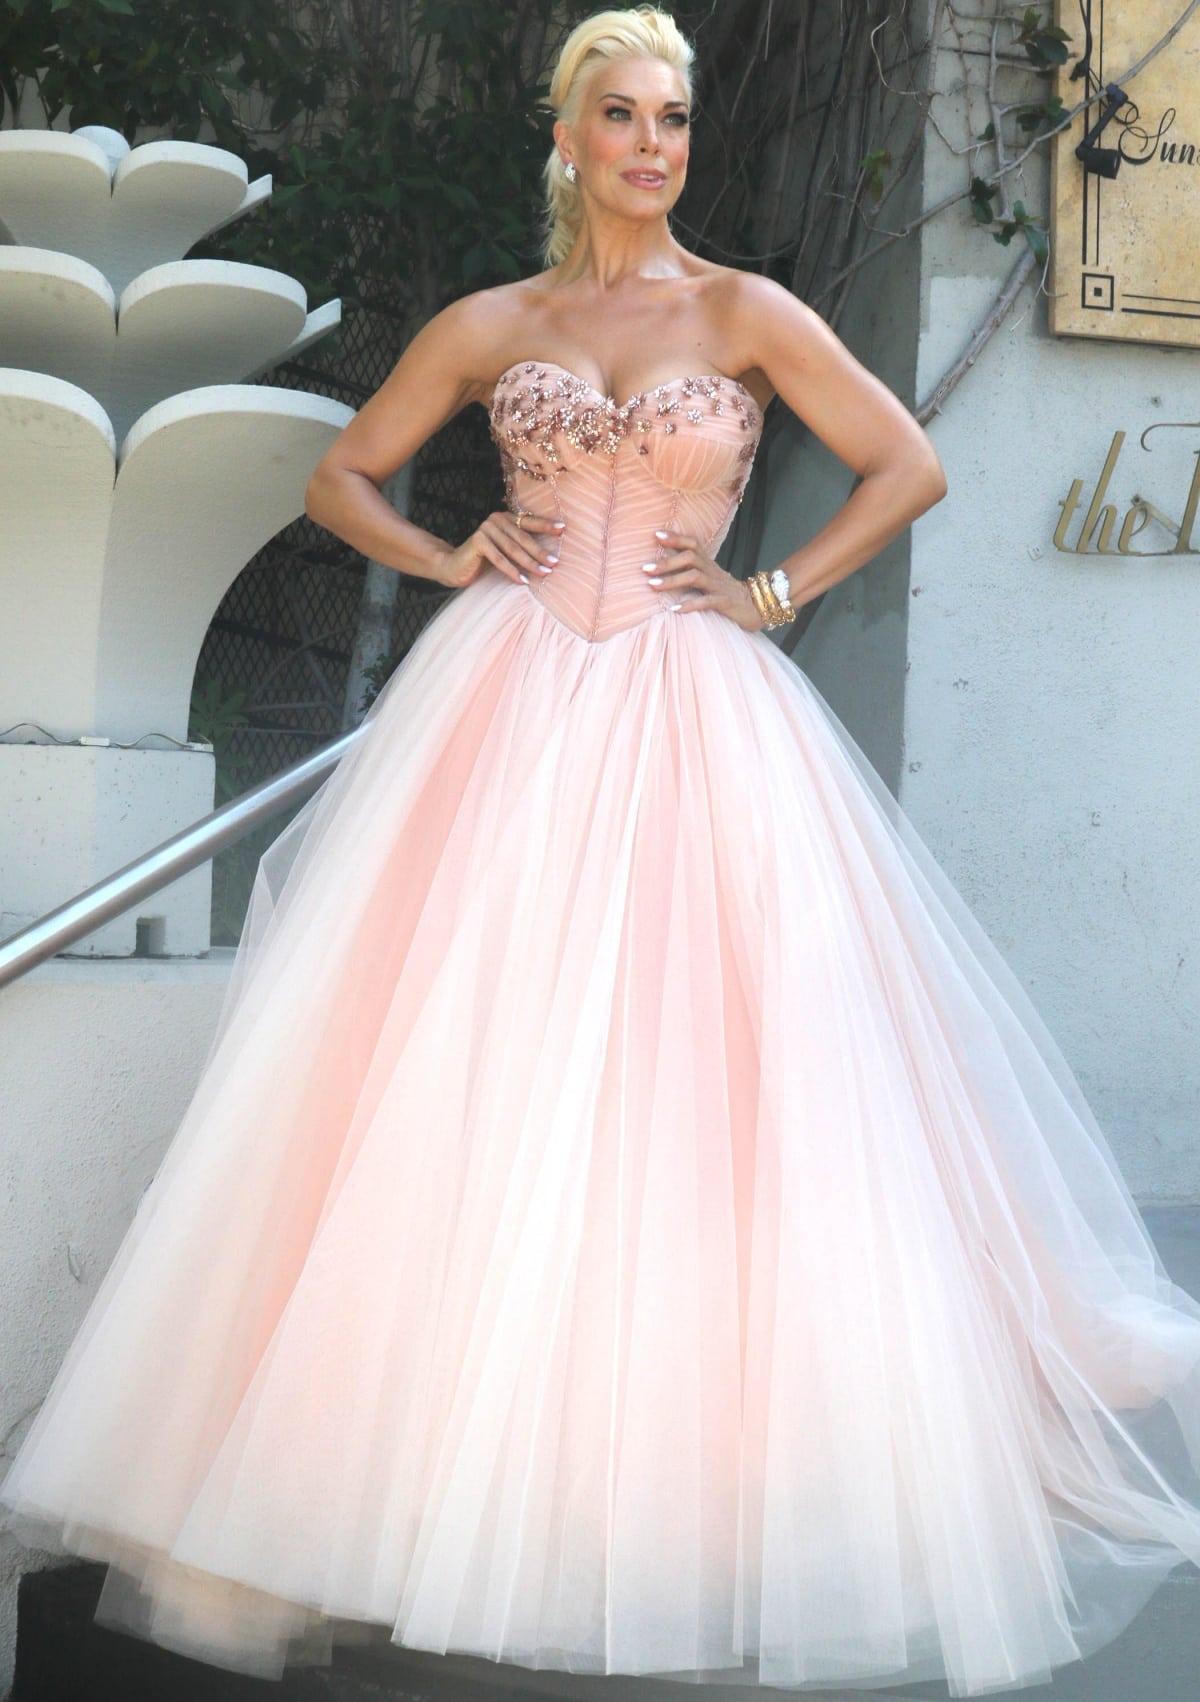 Hannah Waddingham in a pink tulle Dolce & Gabbana gown on her way to the 2022 Primetime Emmy Awards